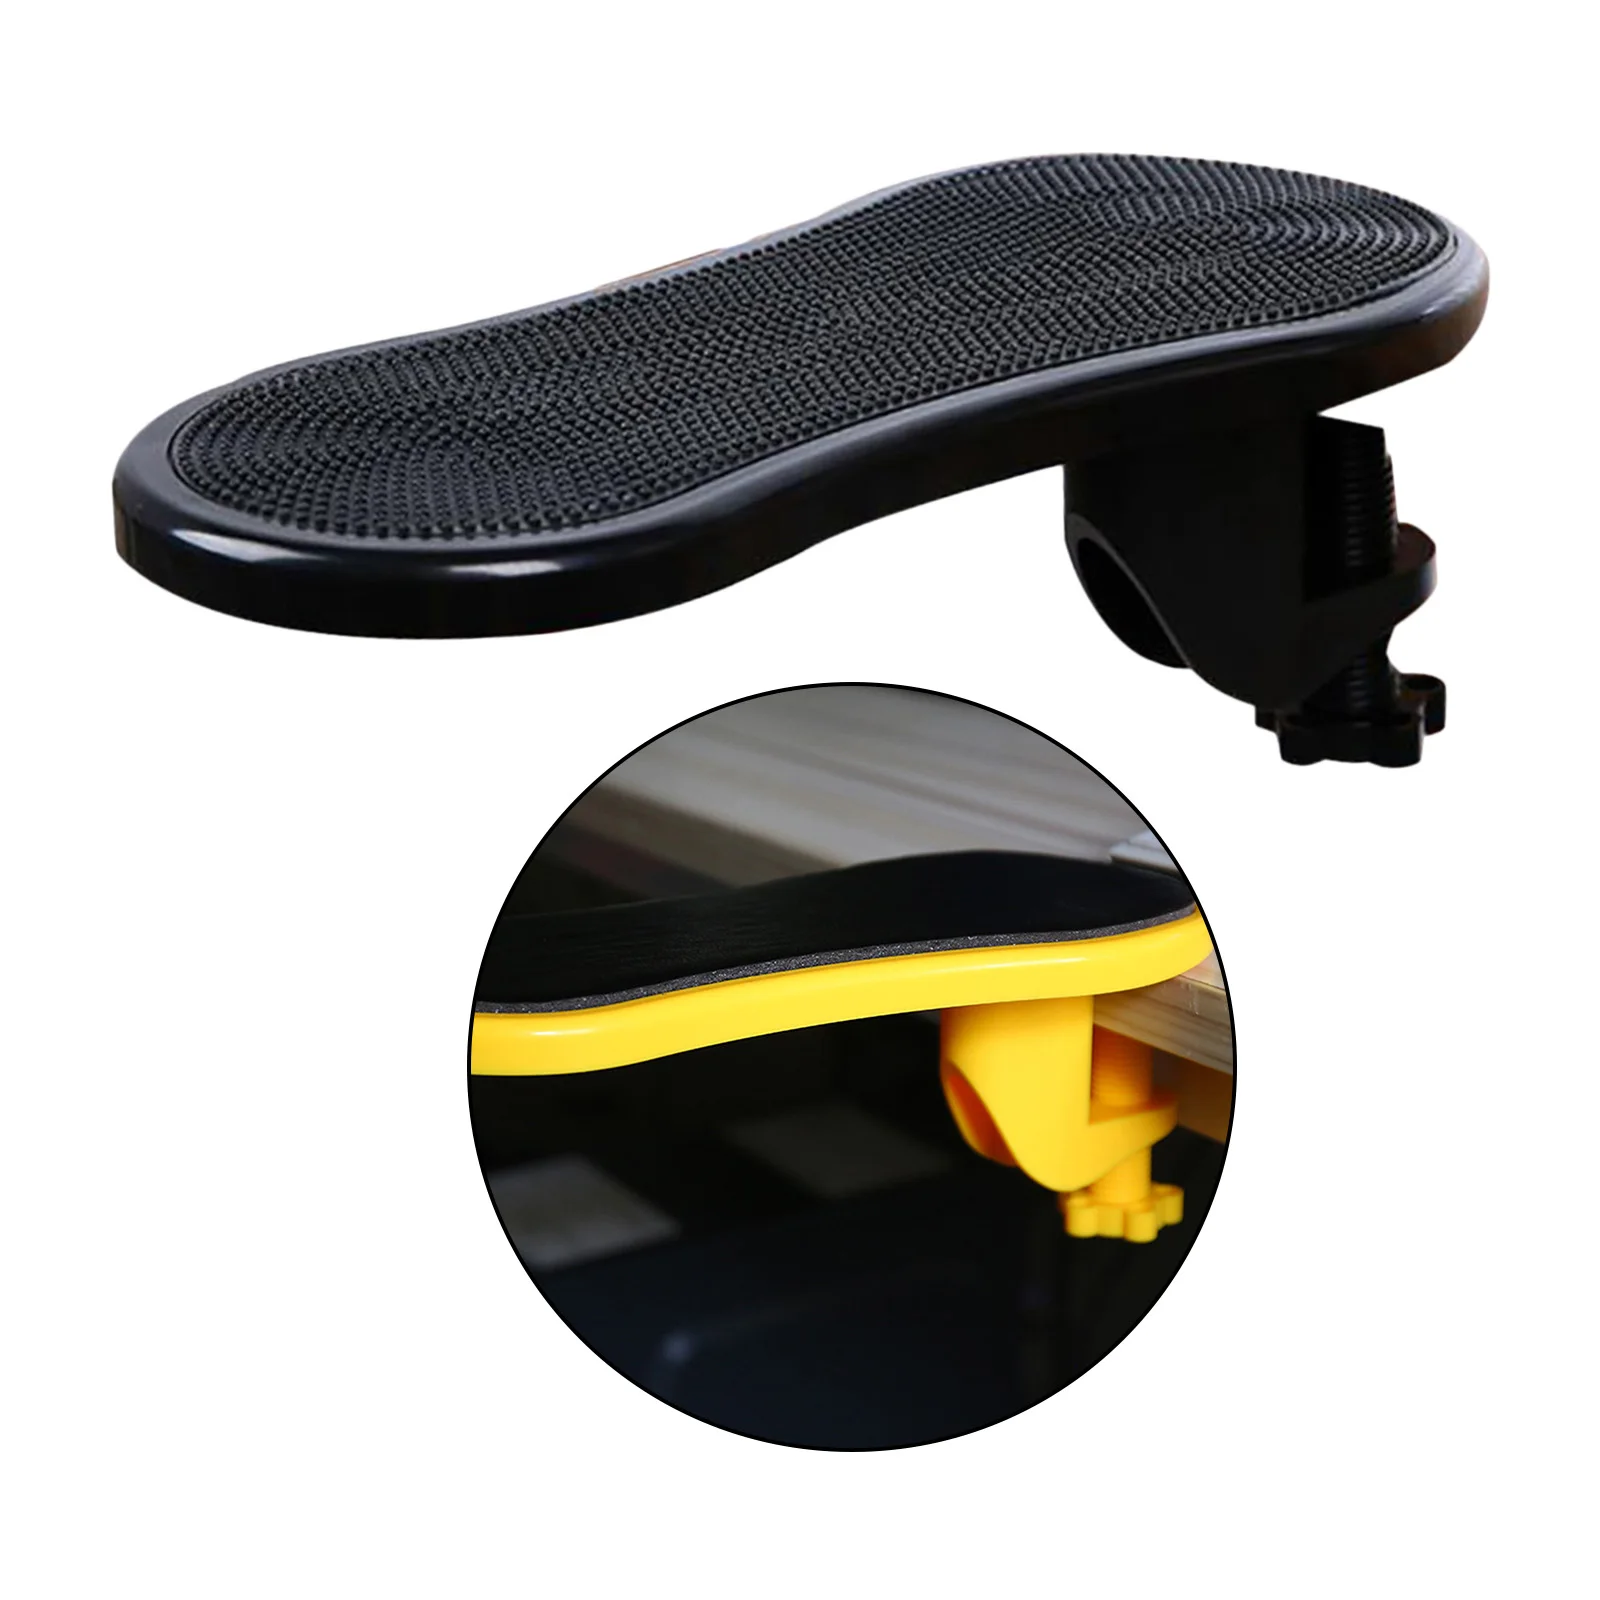 Computer Office Arm Rest Pad Mouse Pad Holder Attachable for Desk Arm Rest Extender Home Table Office Chair